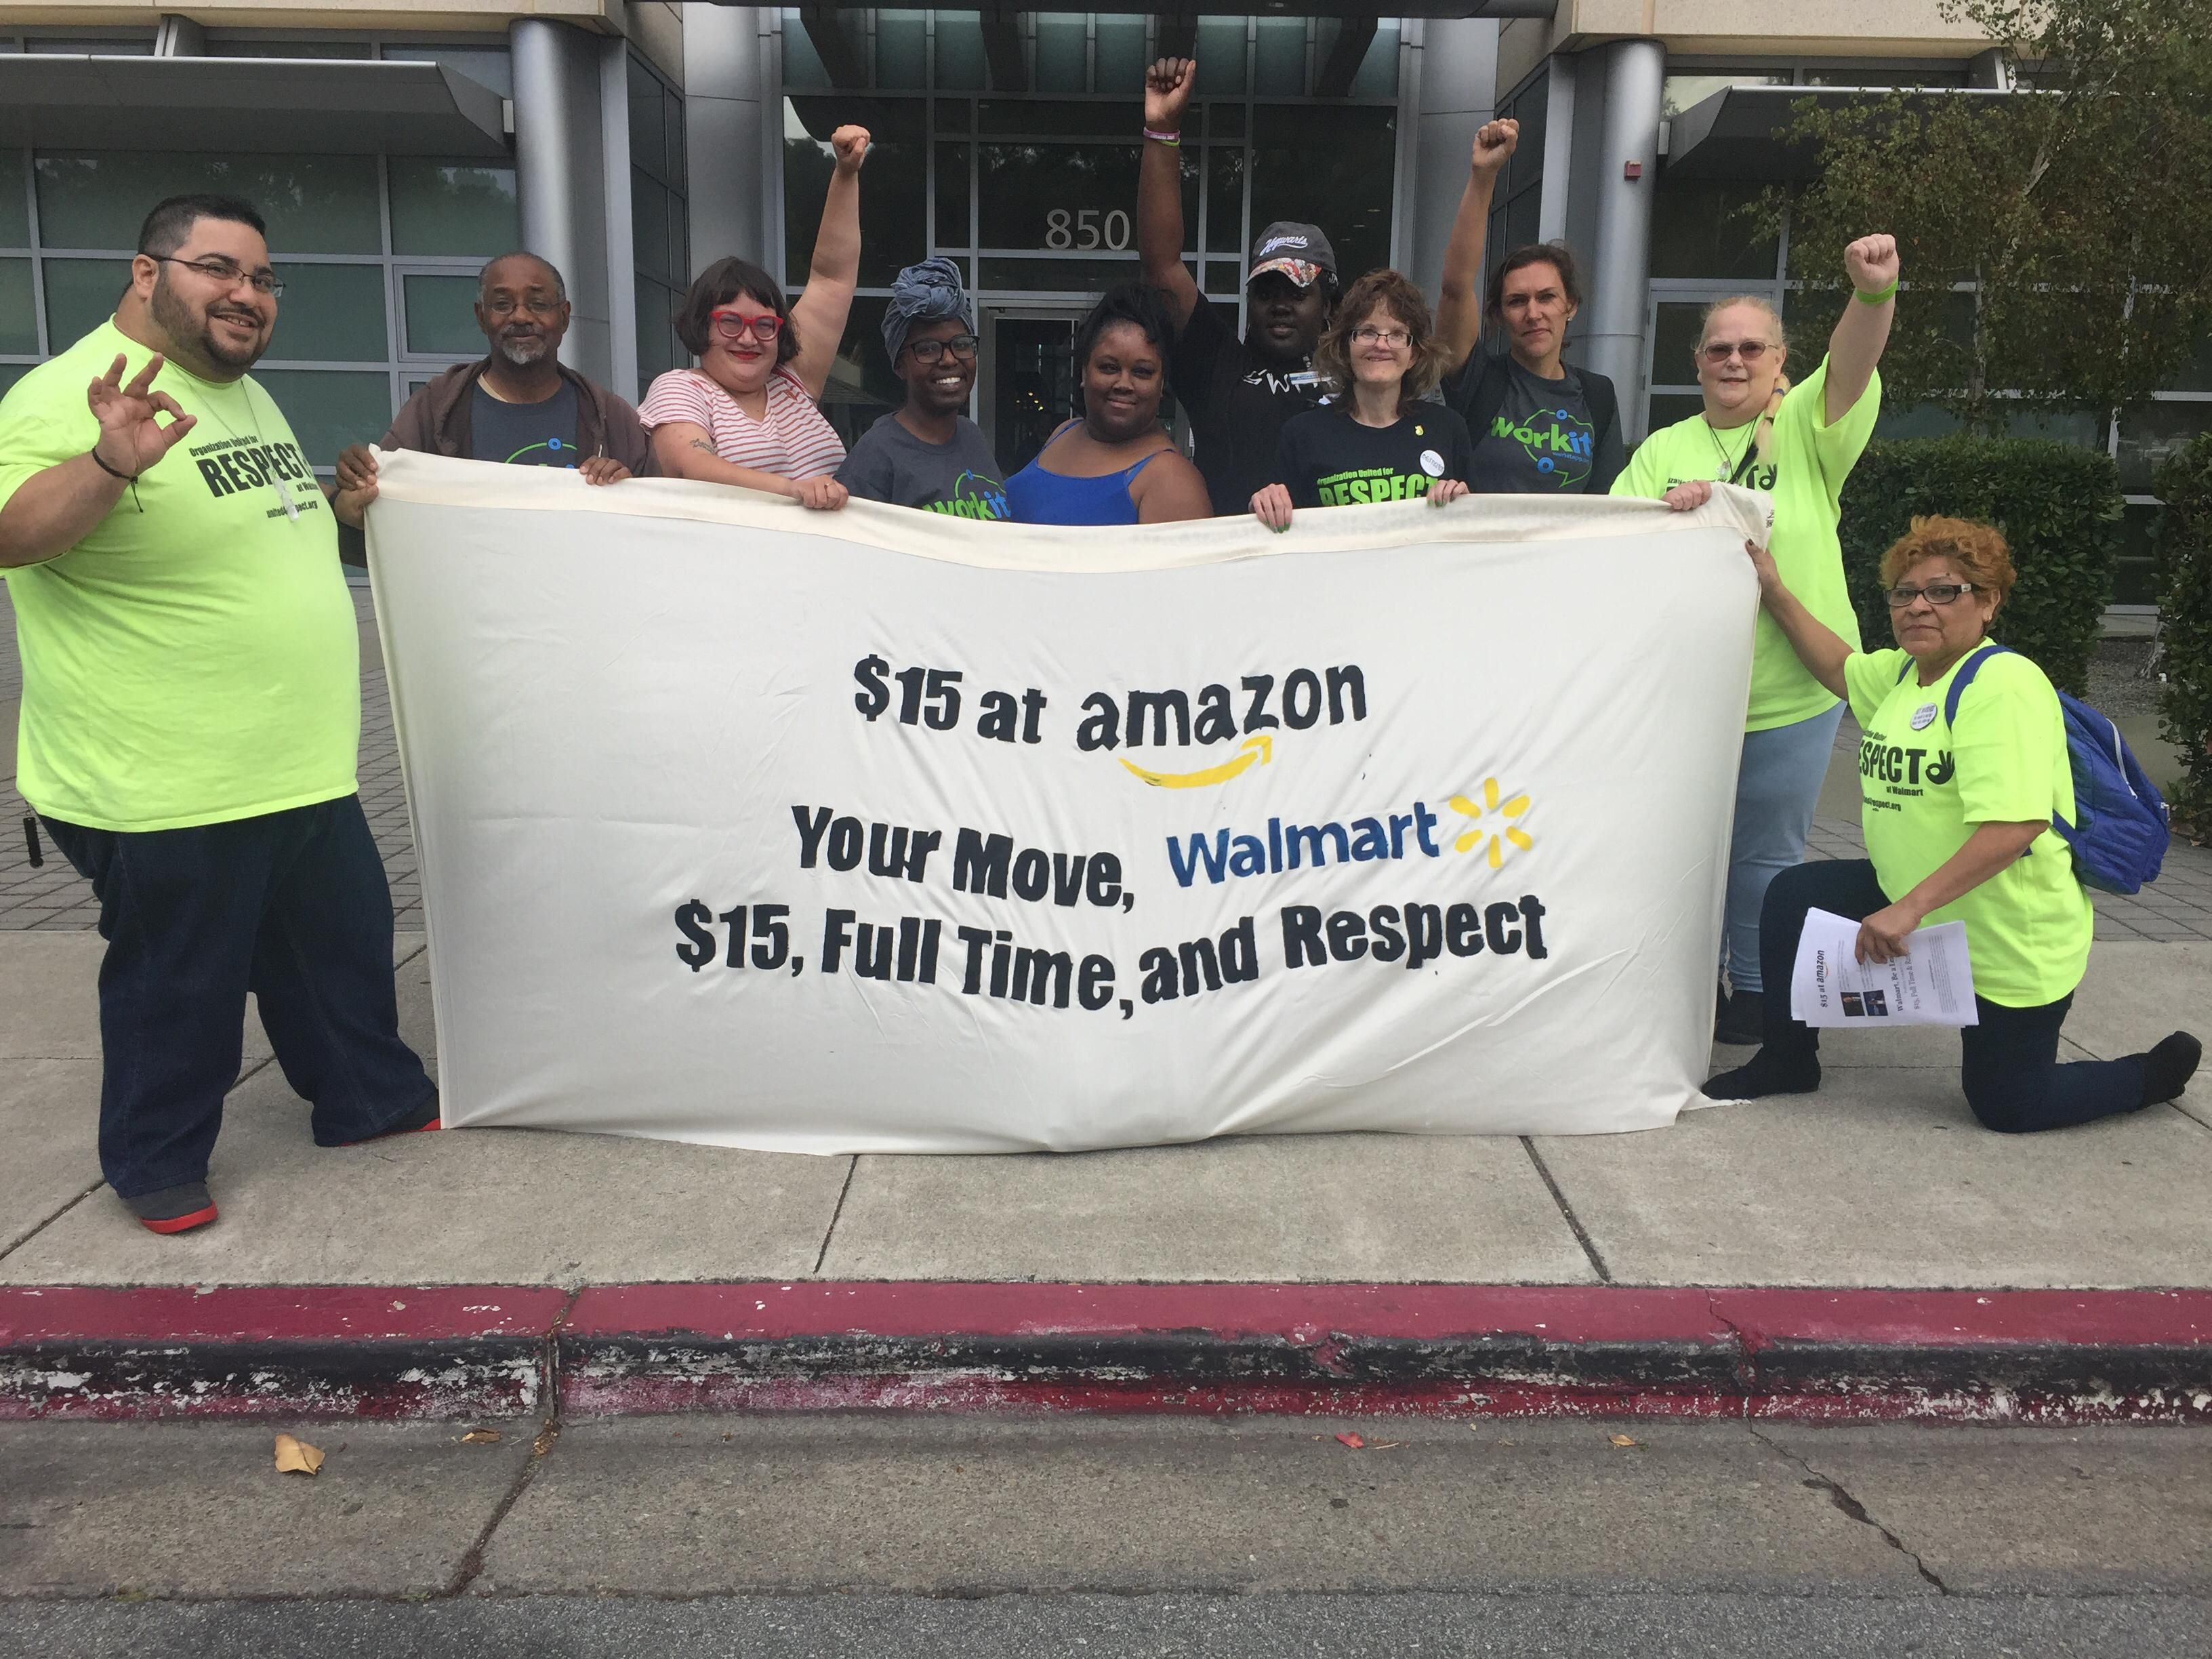  Walmart also has a reputation for wage theft. Its the leading wage theft employer in the United States, with more than $1.4 billion paid in wage theft fines and settlements since 2000. (Photo: Michael Sainato)